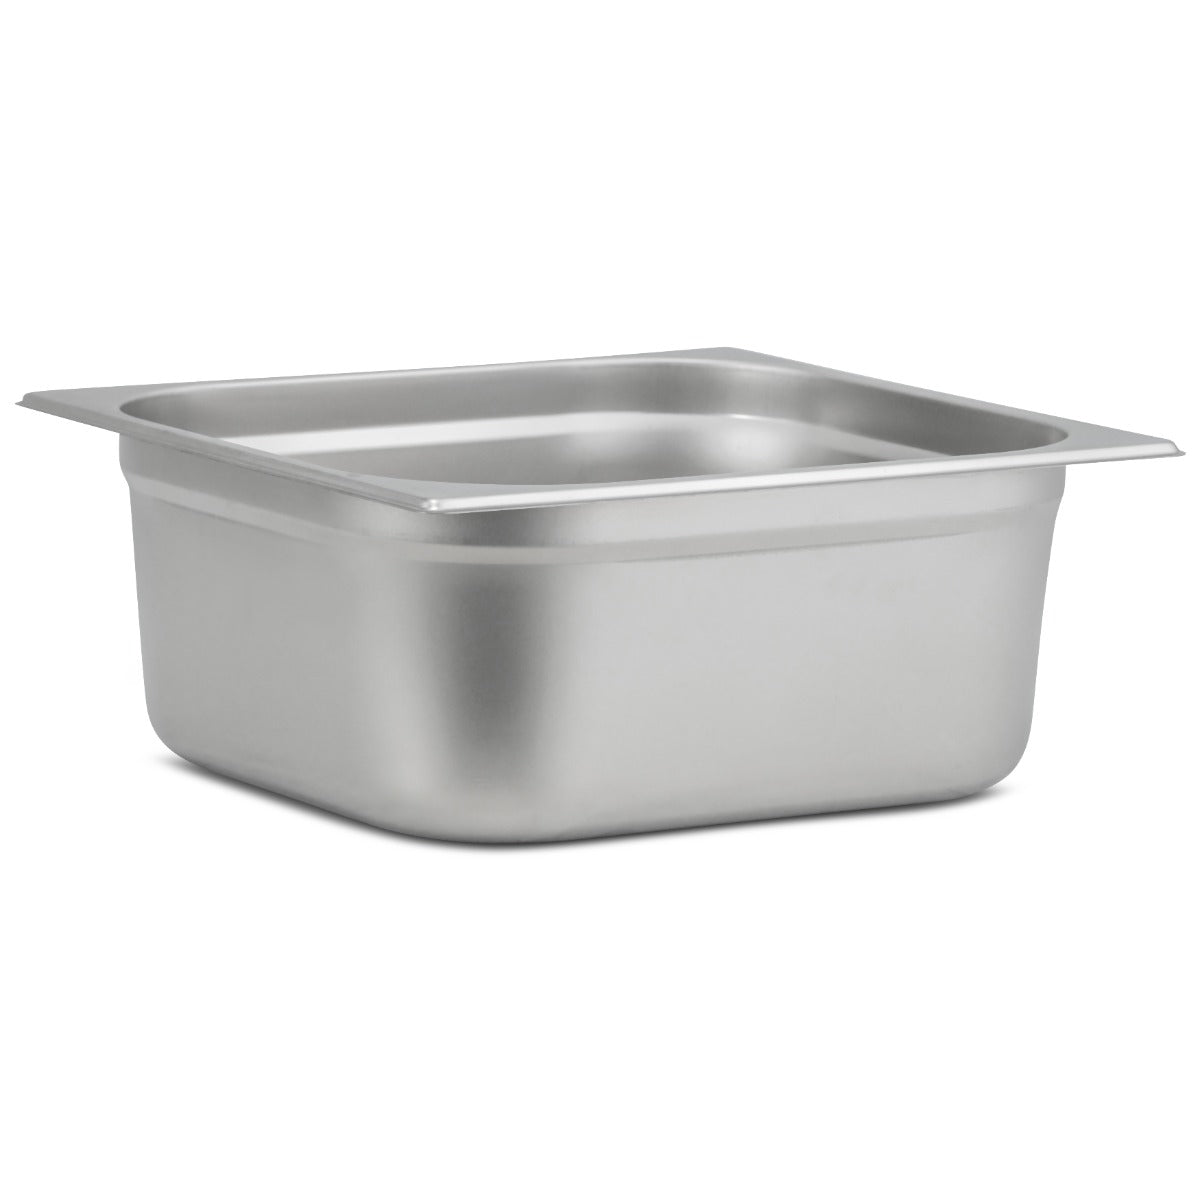 Blizzard Stainless Steel Gastronorm Pan